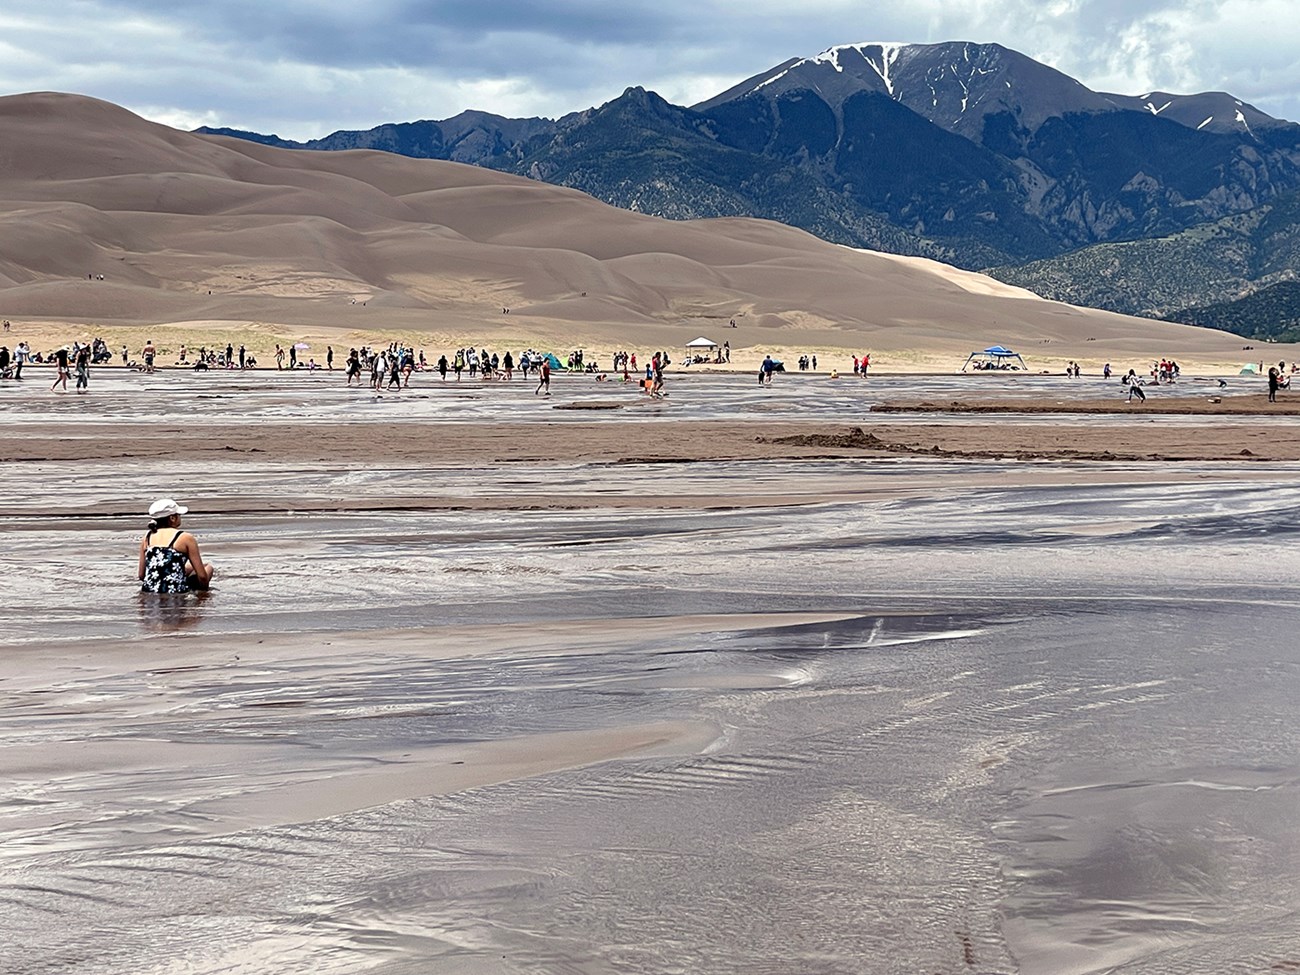 A wide shallow stream flowing at the base of dunes and mountains with visitors playing